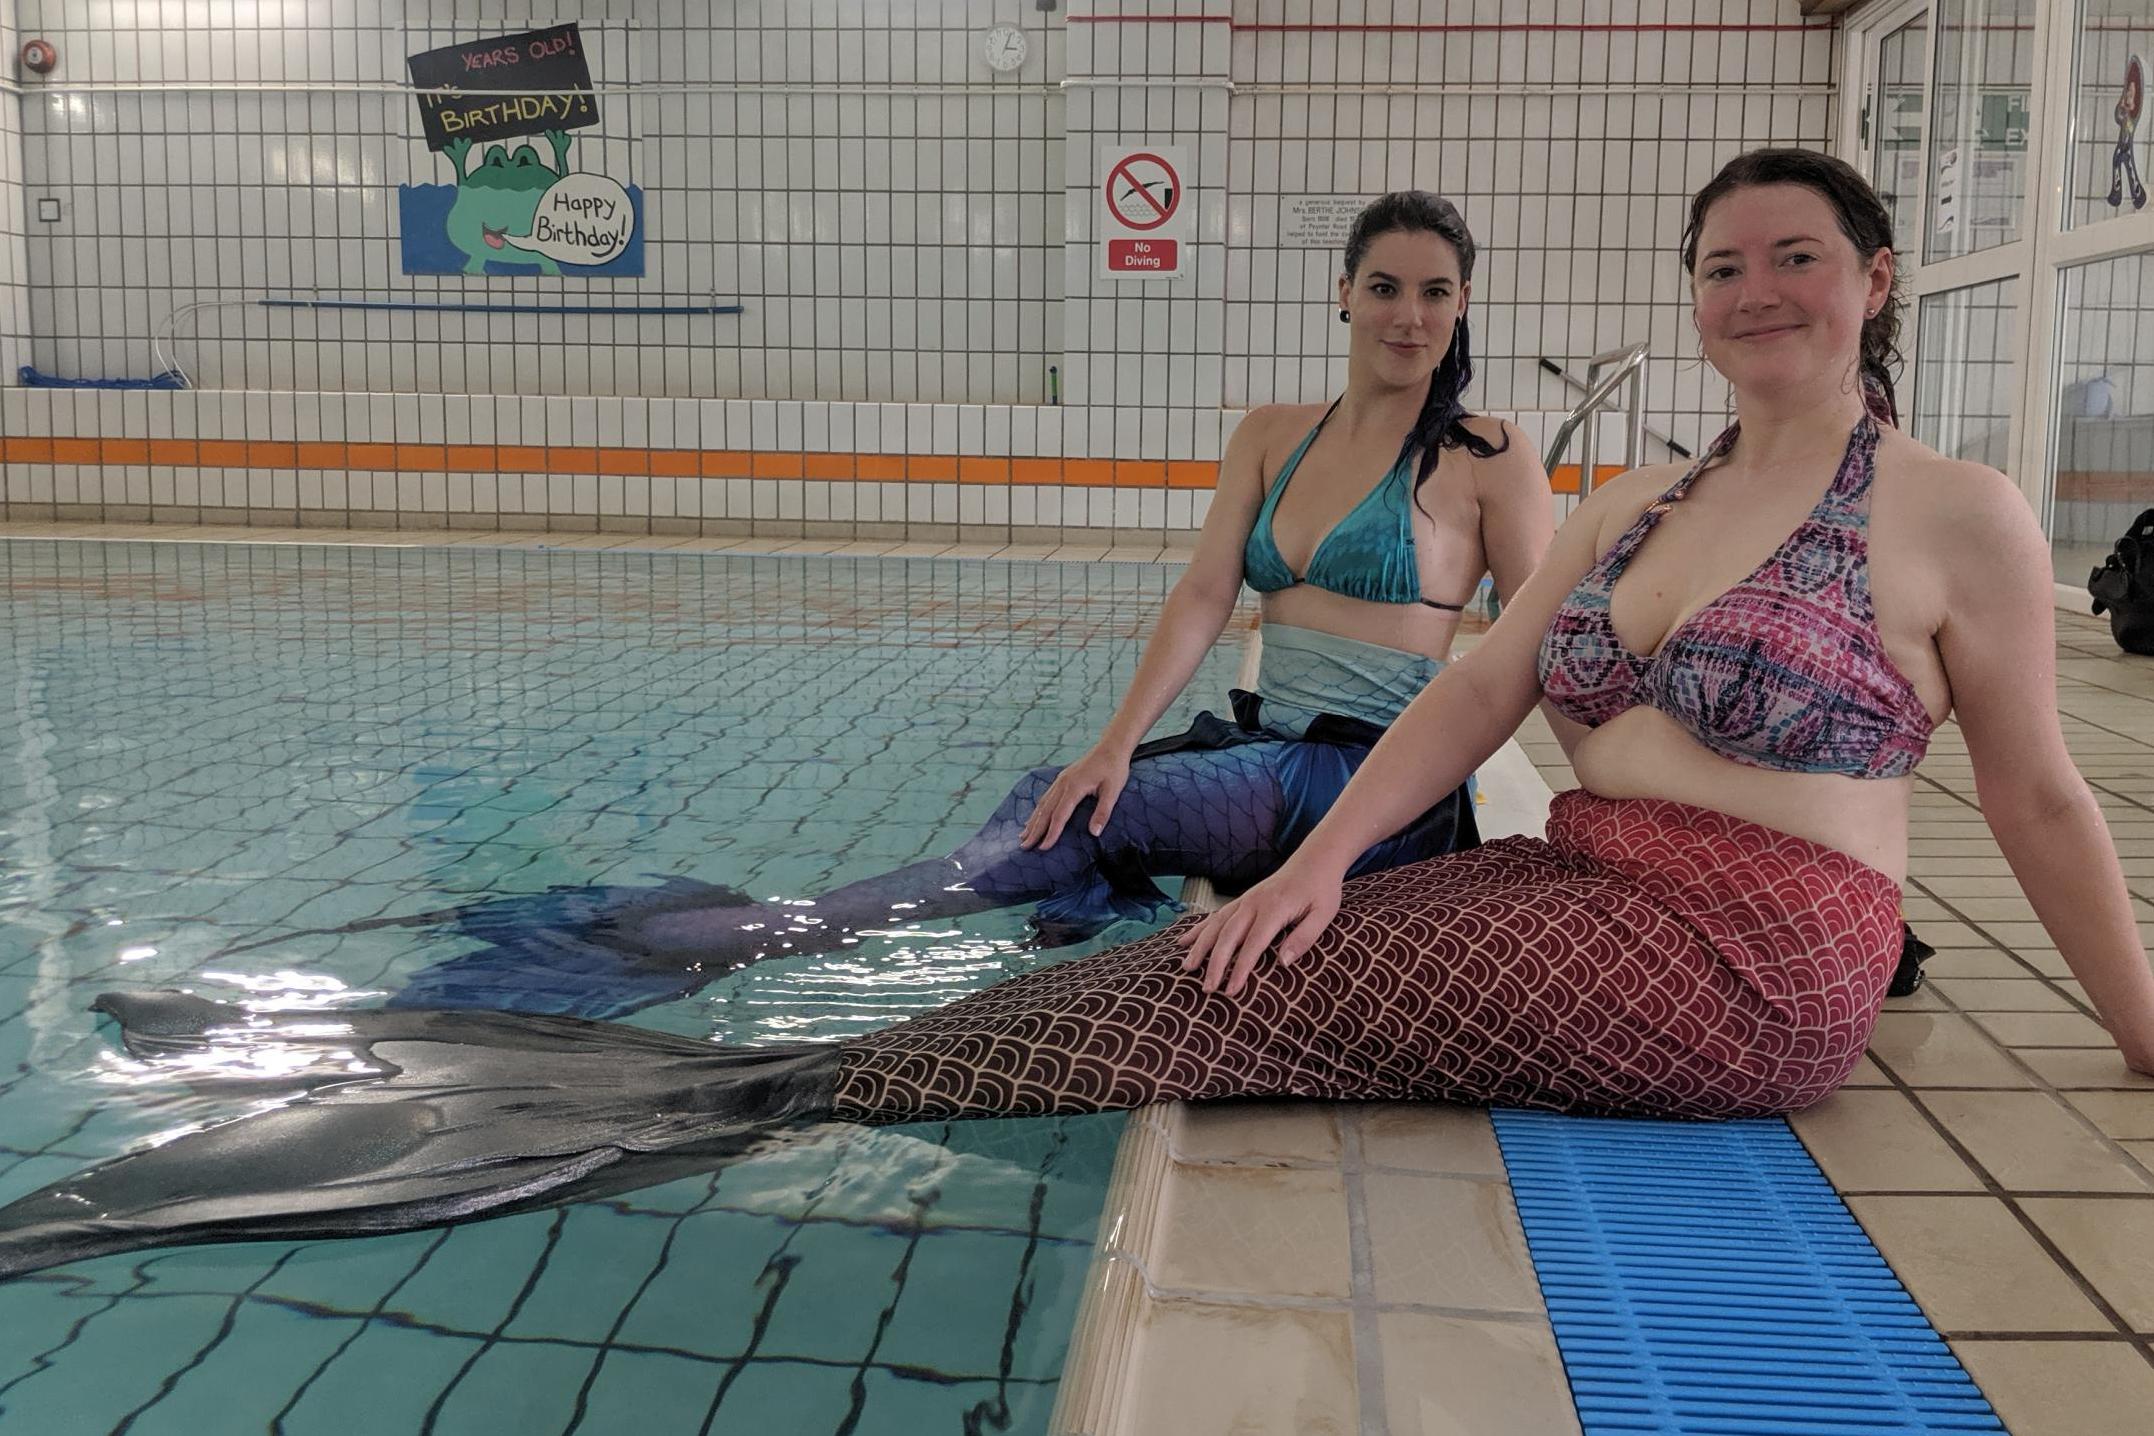 Being a mermaid on dry land can feel pretty uncomfortable